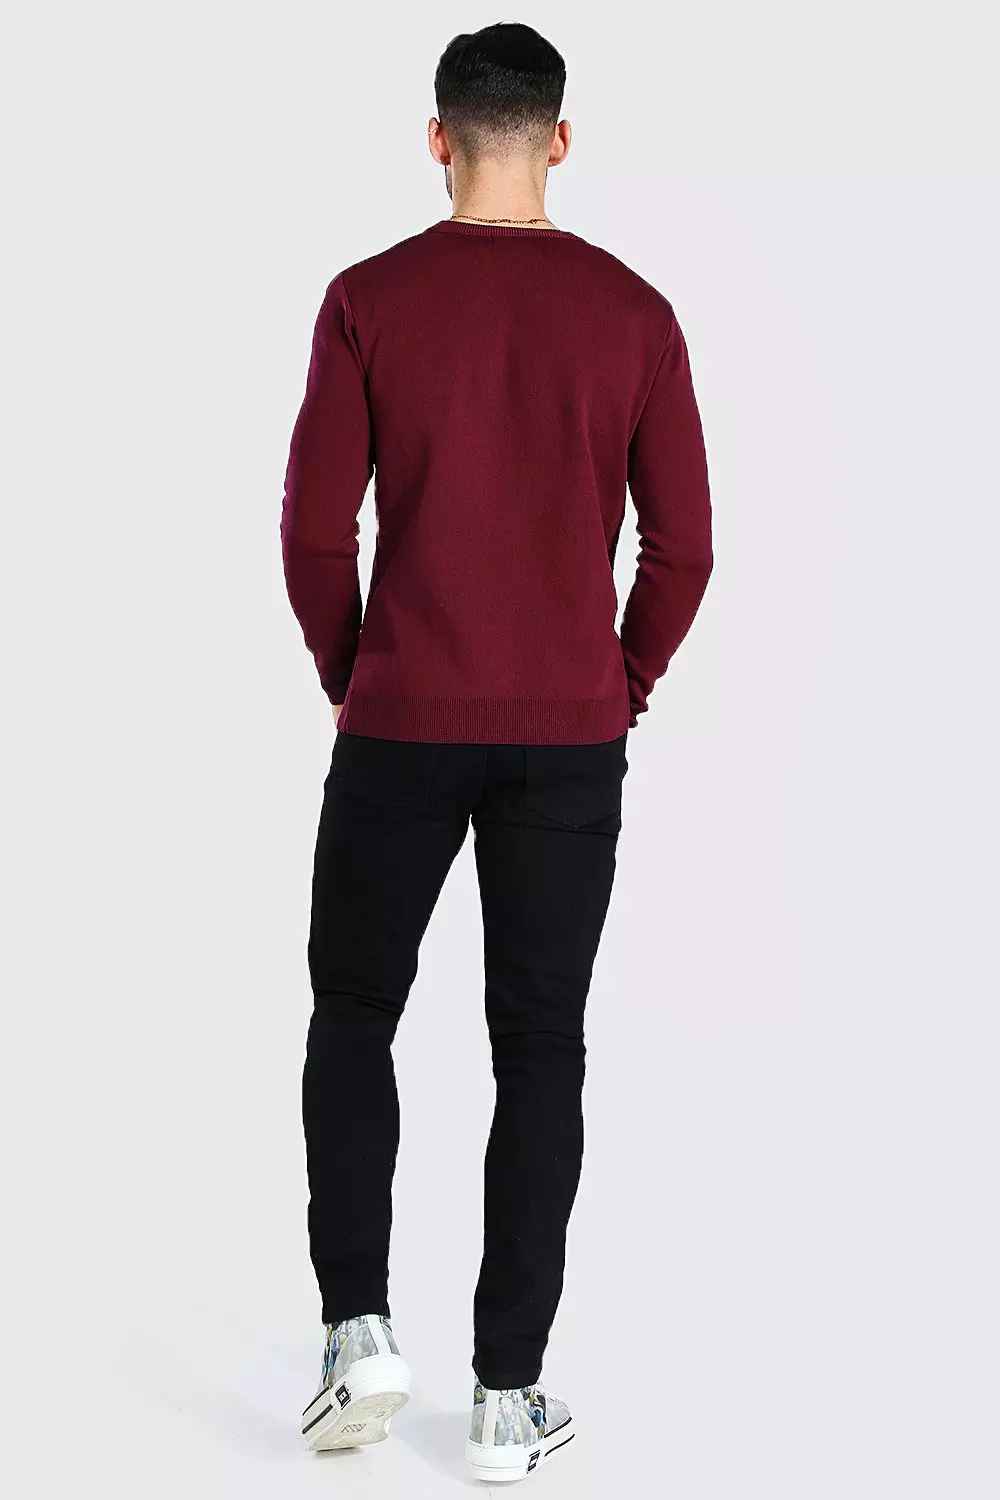 Buy Burgundy Textured Crew Neck Jumper M, Jumpers and cardigans